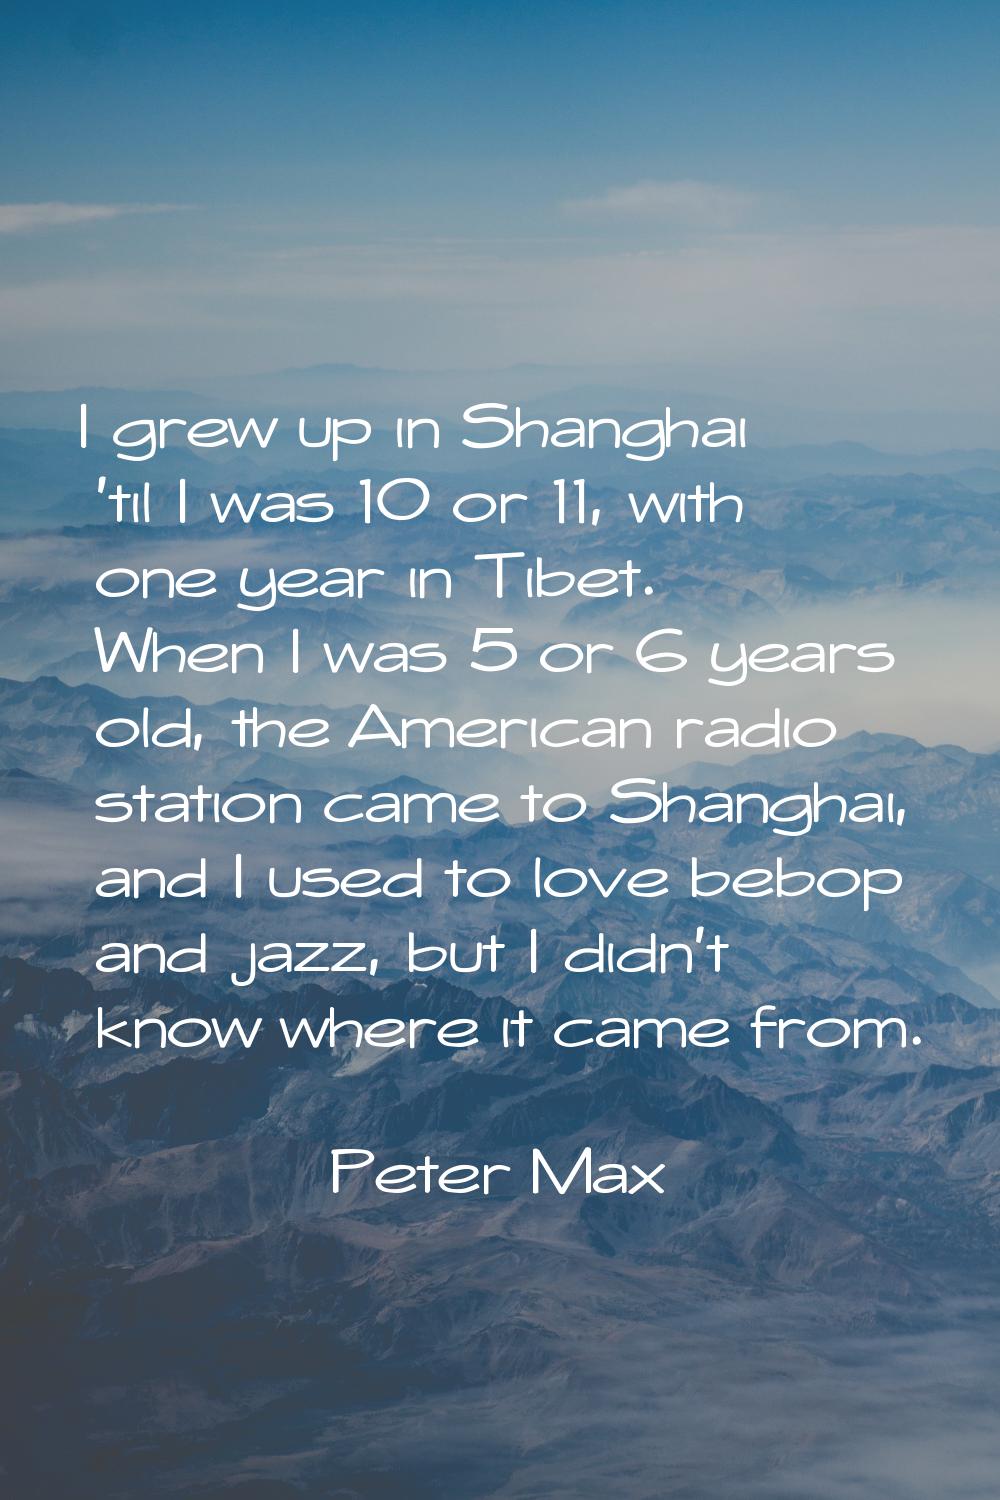 I grew up in Shanghai 'til I was 10 or 11, with one year in Tibet. When I was 5 or 6 years old, the